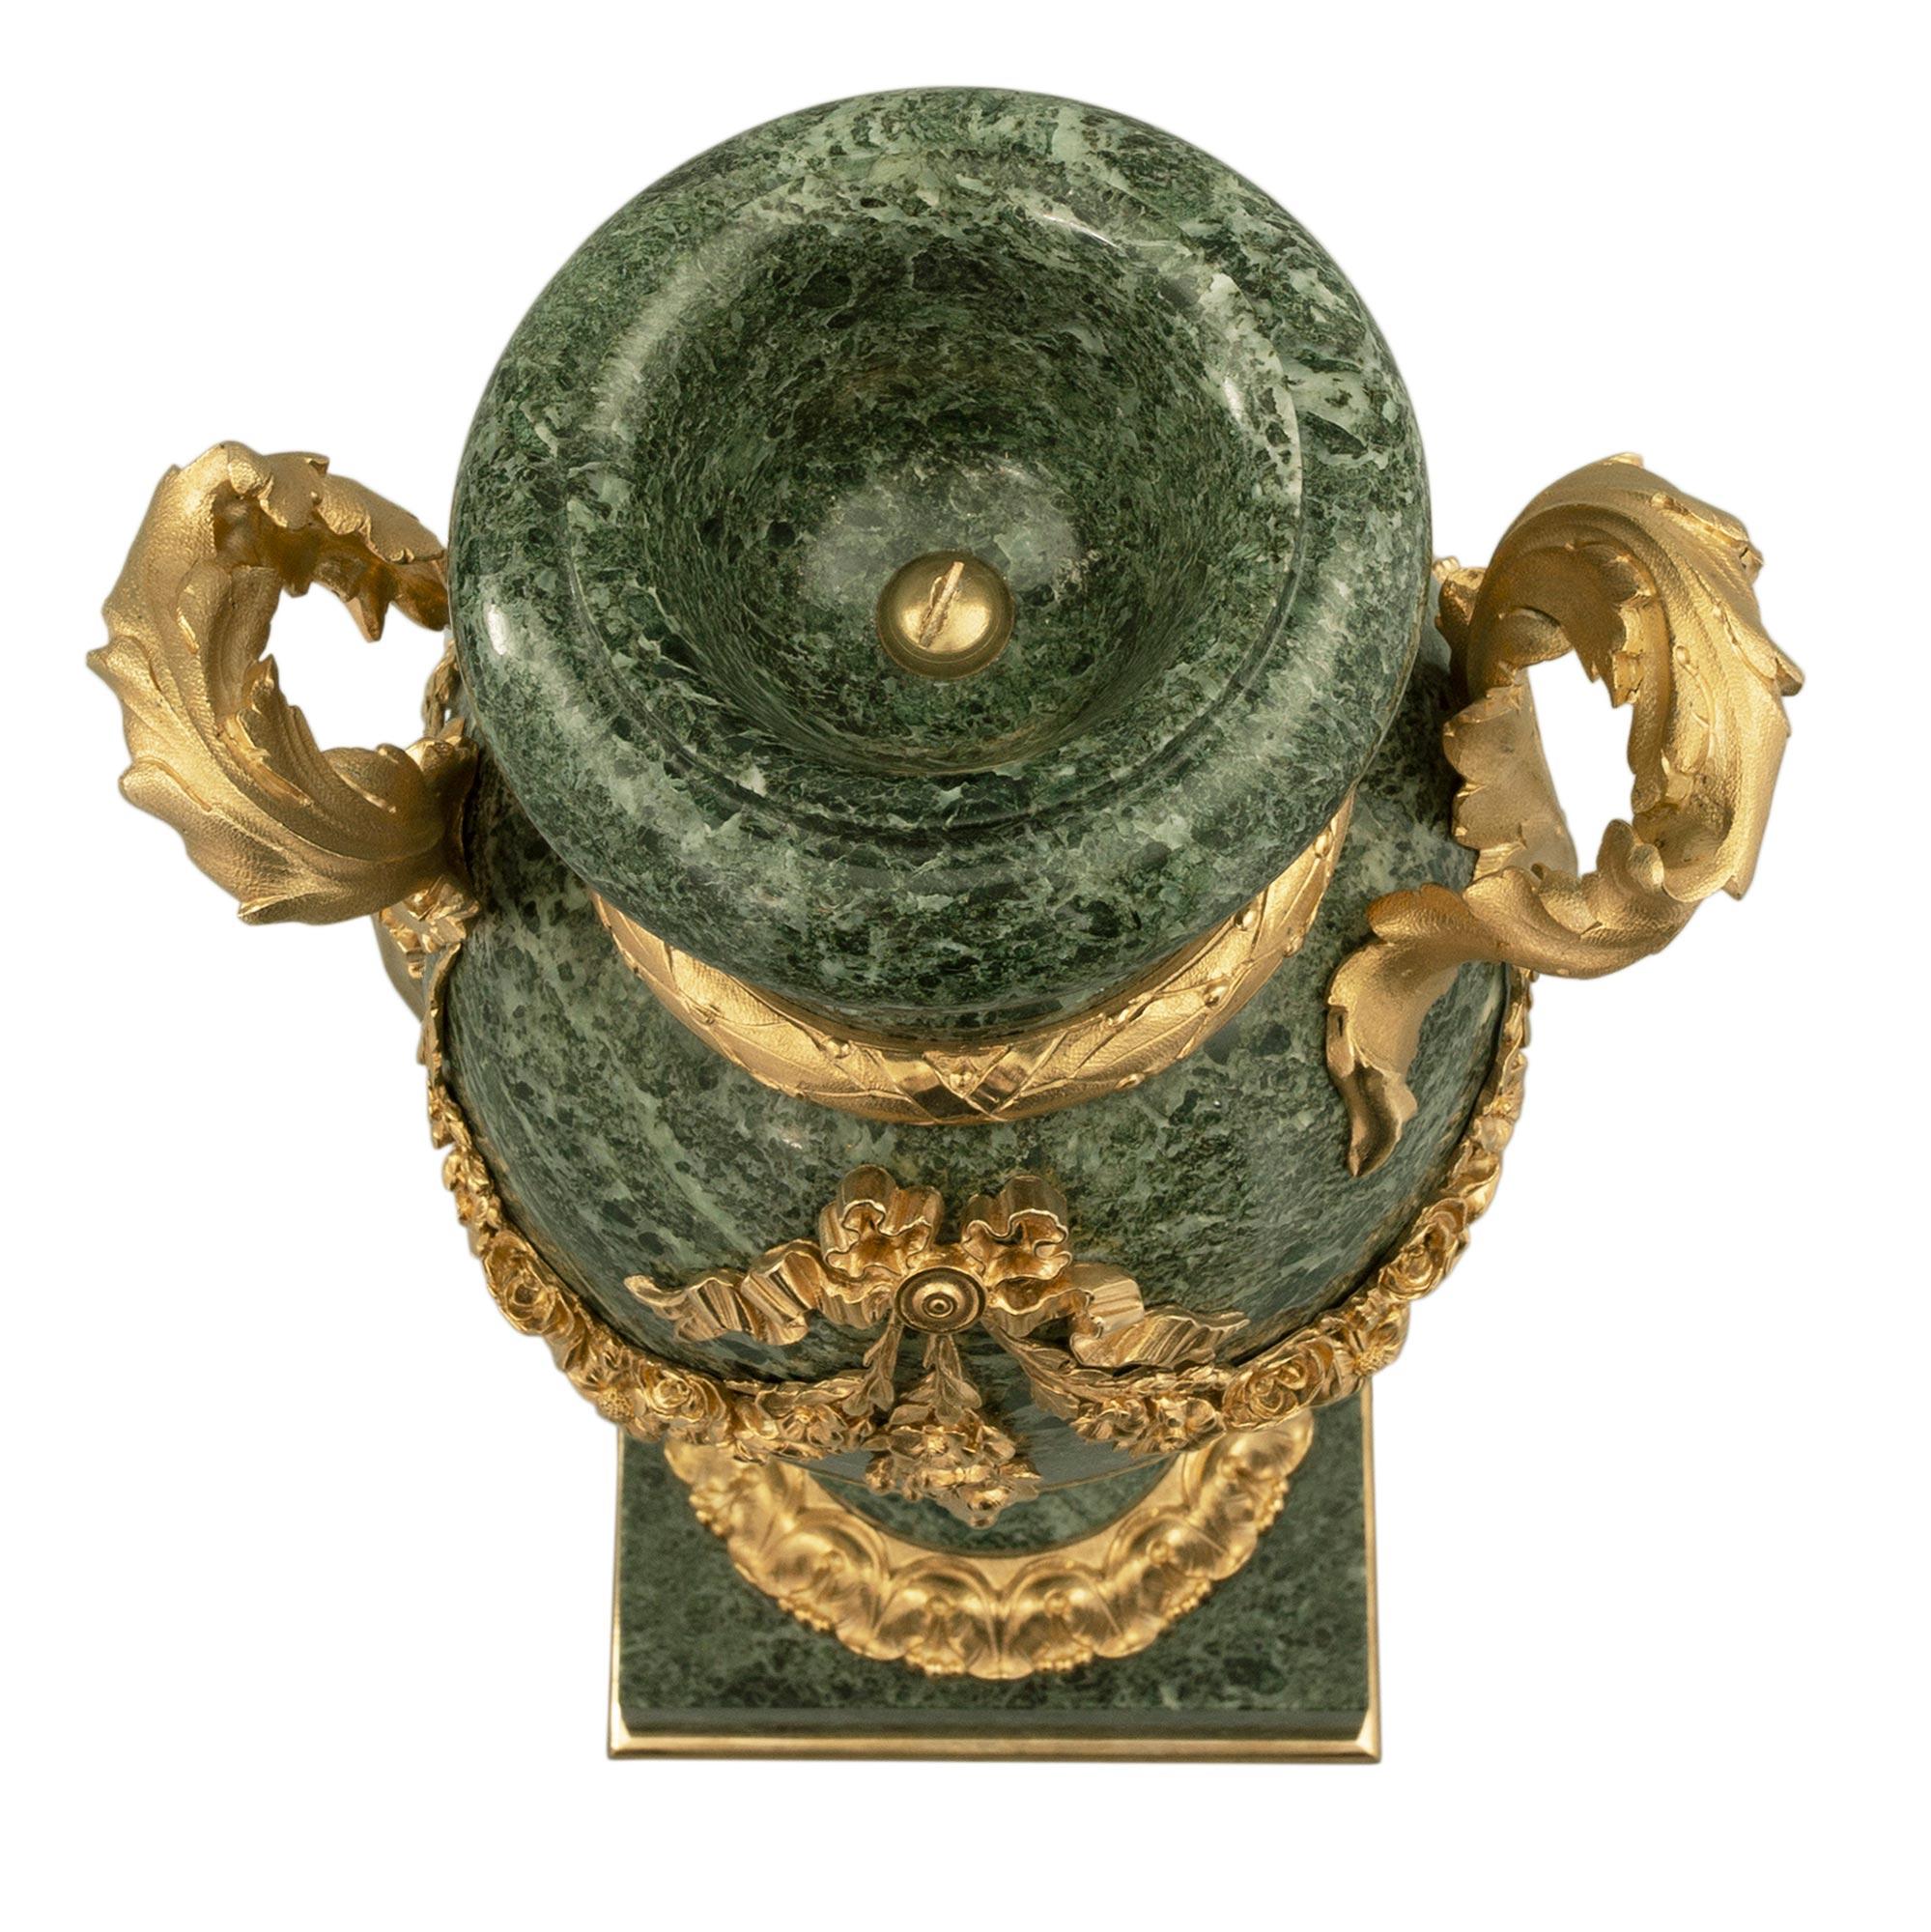 A striking pair of French 19th century Louis XVI st. Vert de Patricia marble and ormolu urns. Each urn is raised by a square marble base with a fine bottom ormolu band. The socle pedestals display finely chased foliate wrap around ormolu bands and